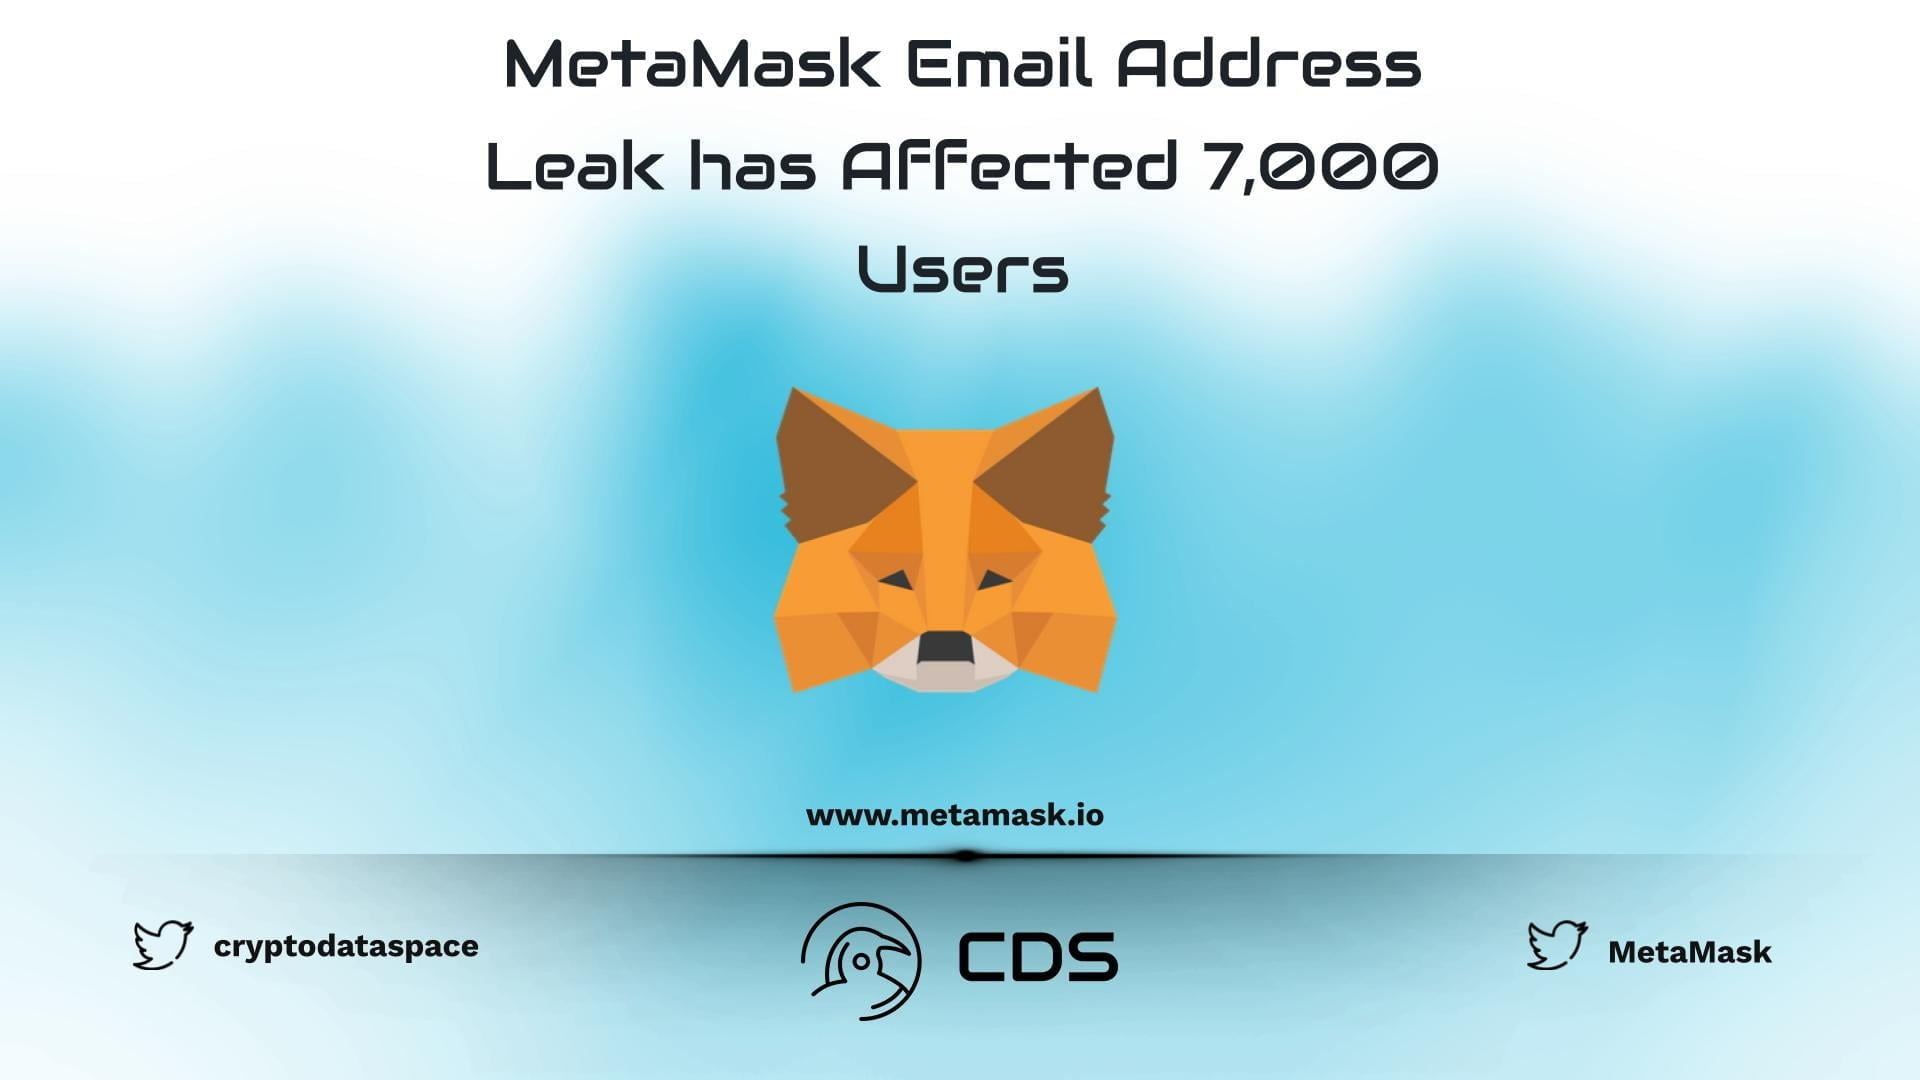 MetaMask Email Address Leak has Affected 7,000 Users